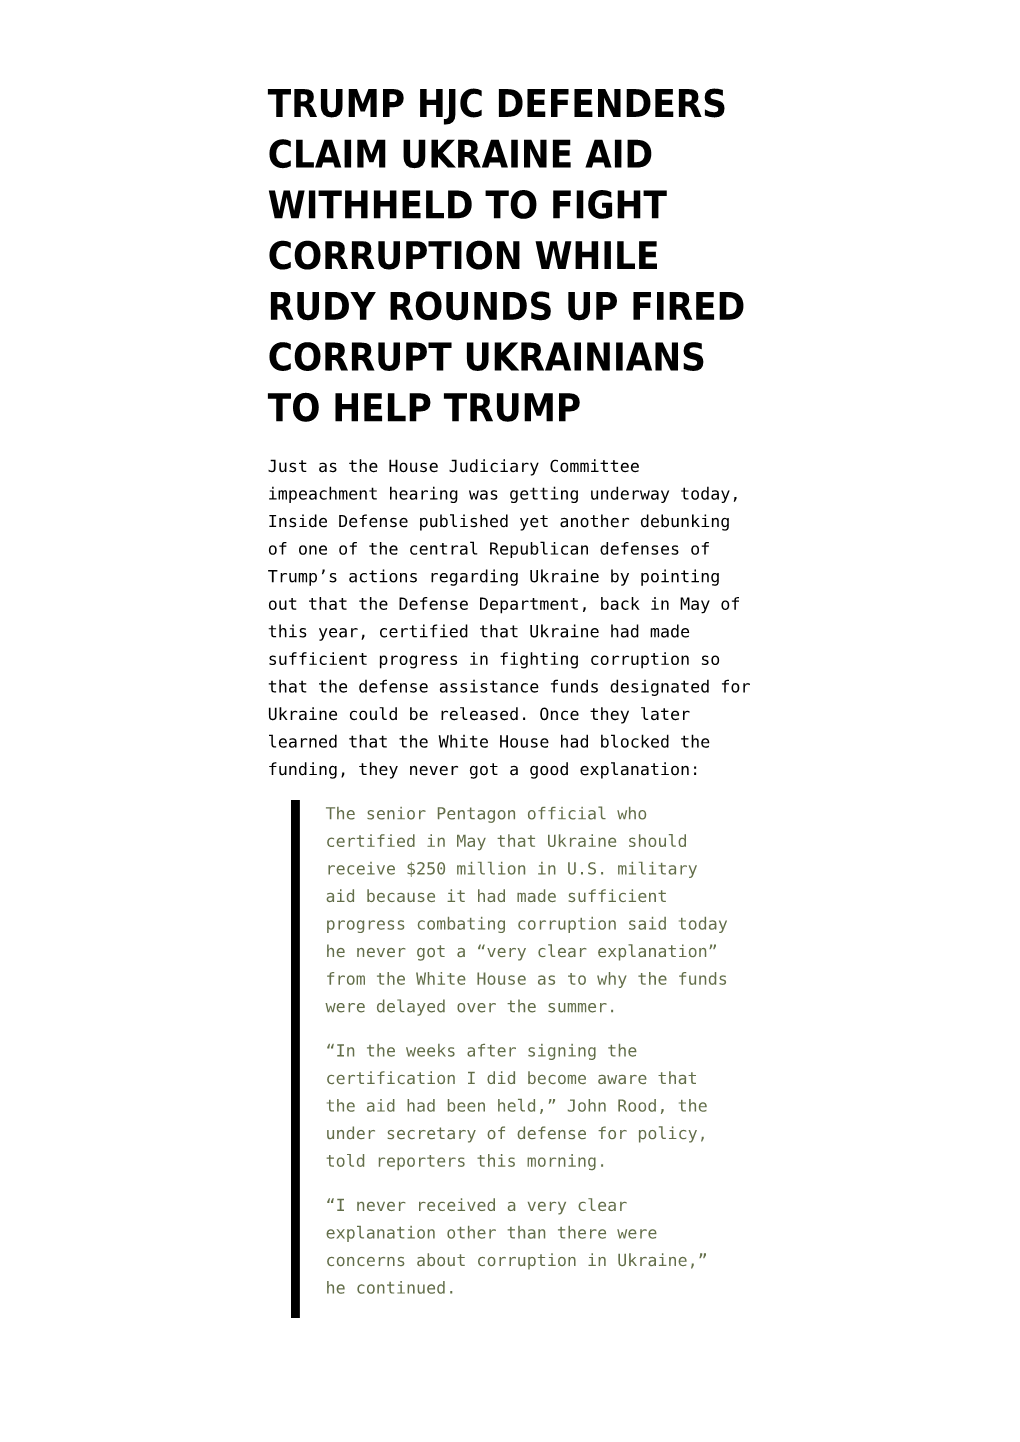 Trump Hjc Defenders Claim Ukraine Aid Withheld to Fight Corruption While Rudy Rounds up Fired Corrupt Ukrainians to Help Trump